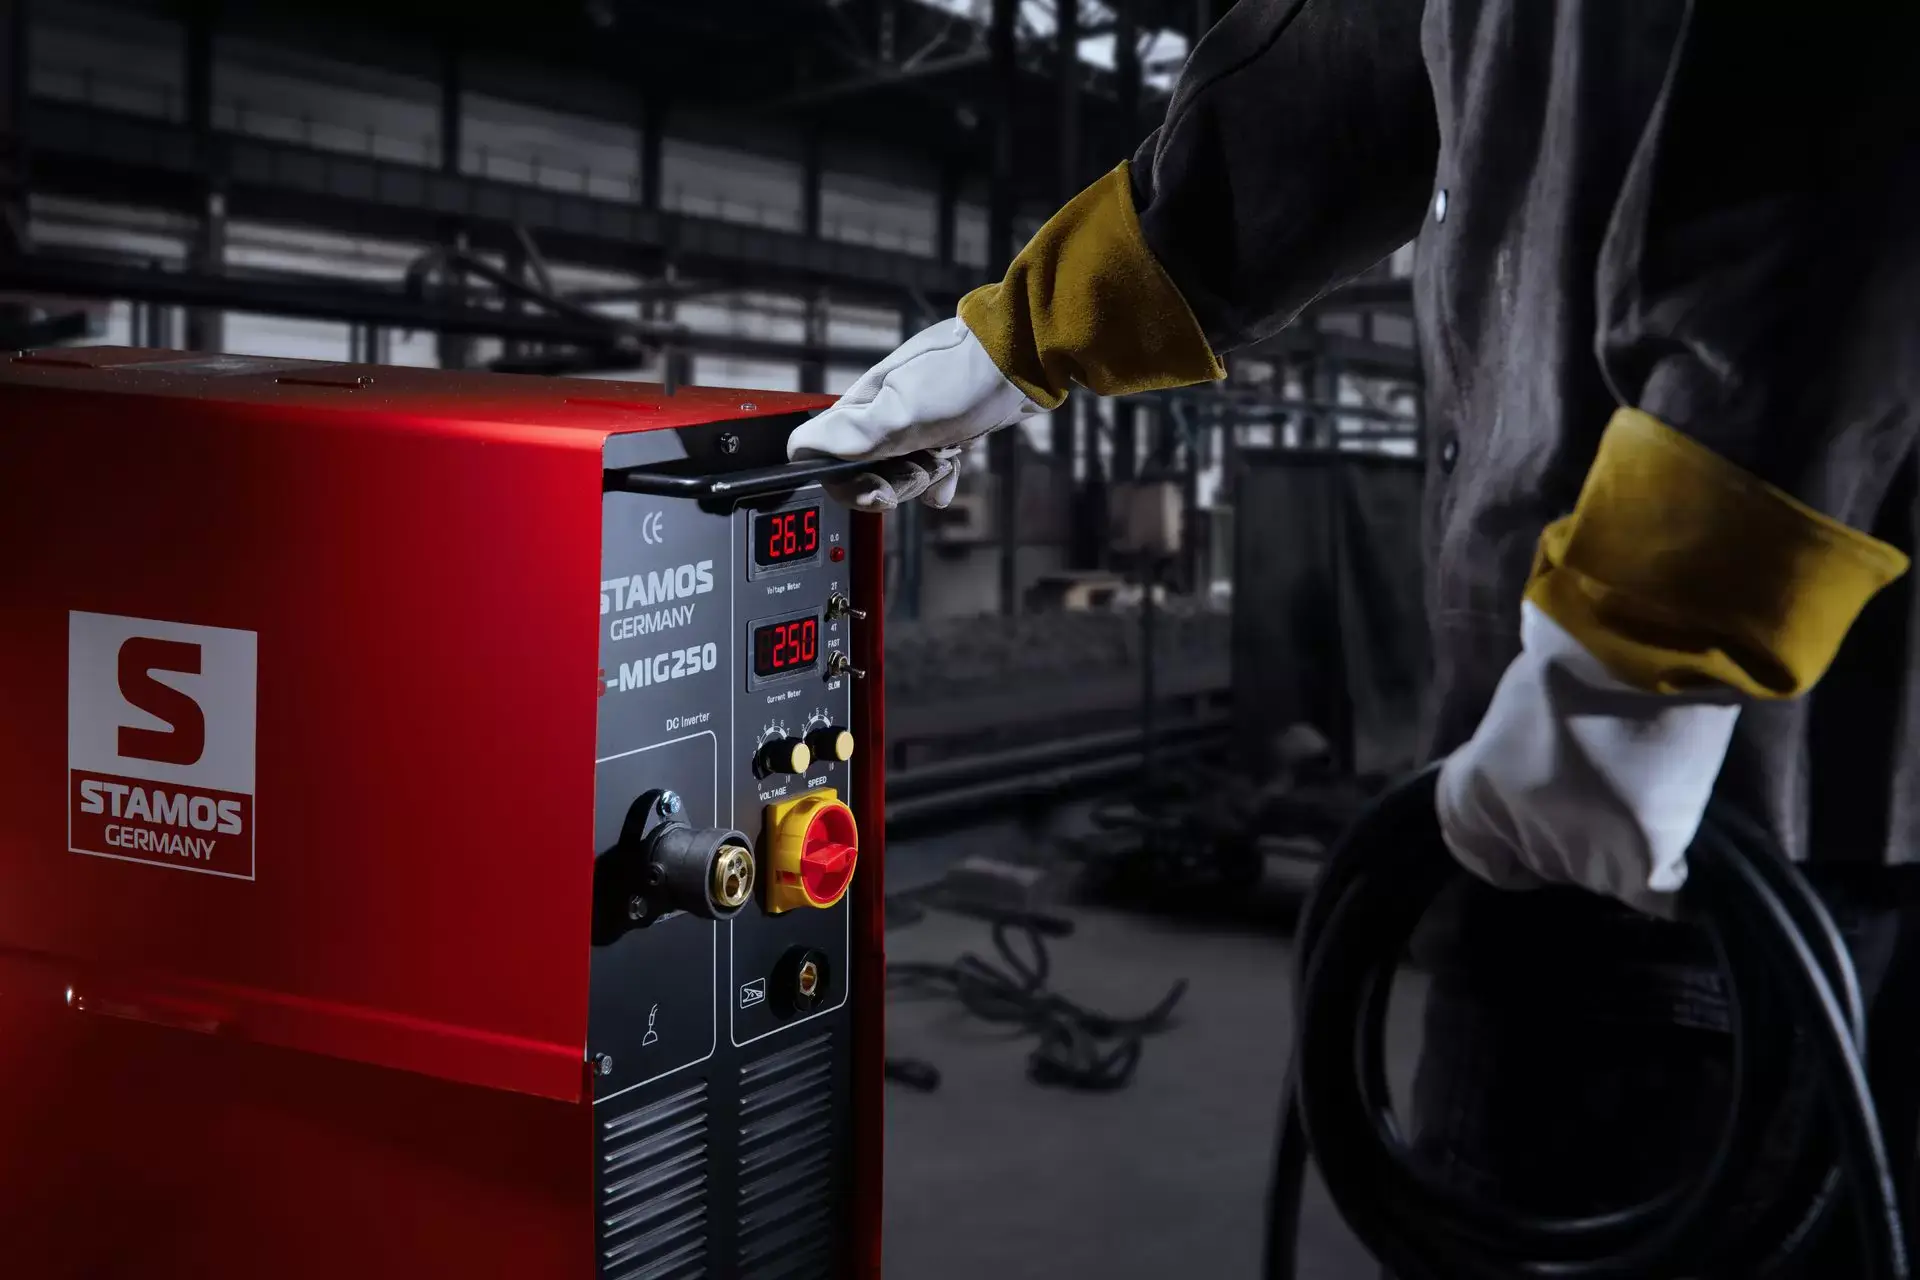 Inverter or transformer welding machine? Features and differences